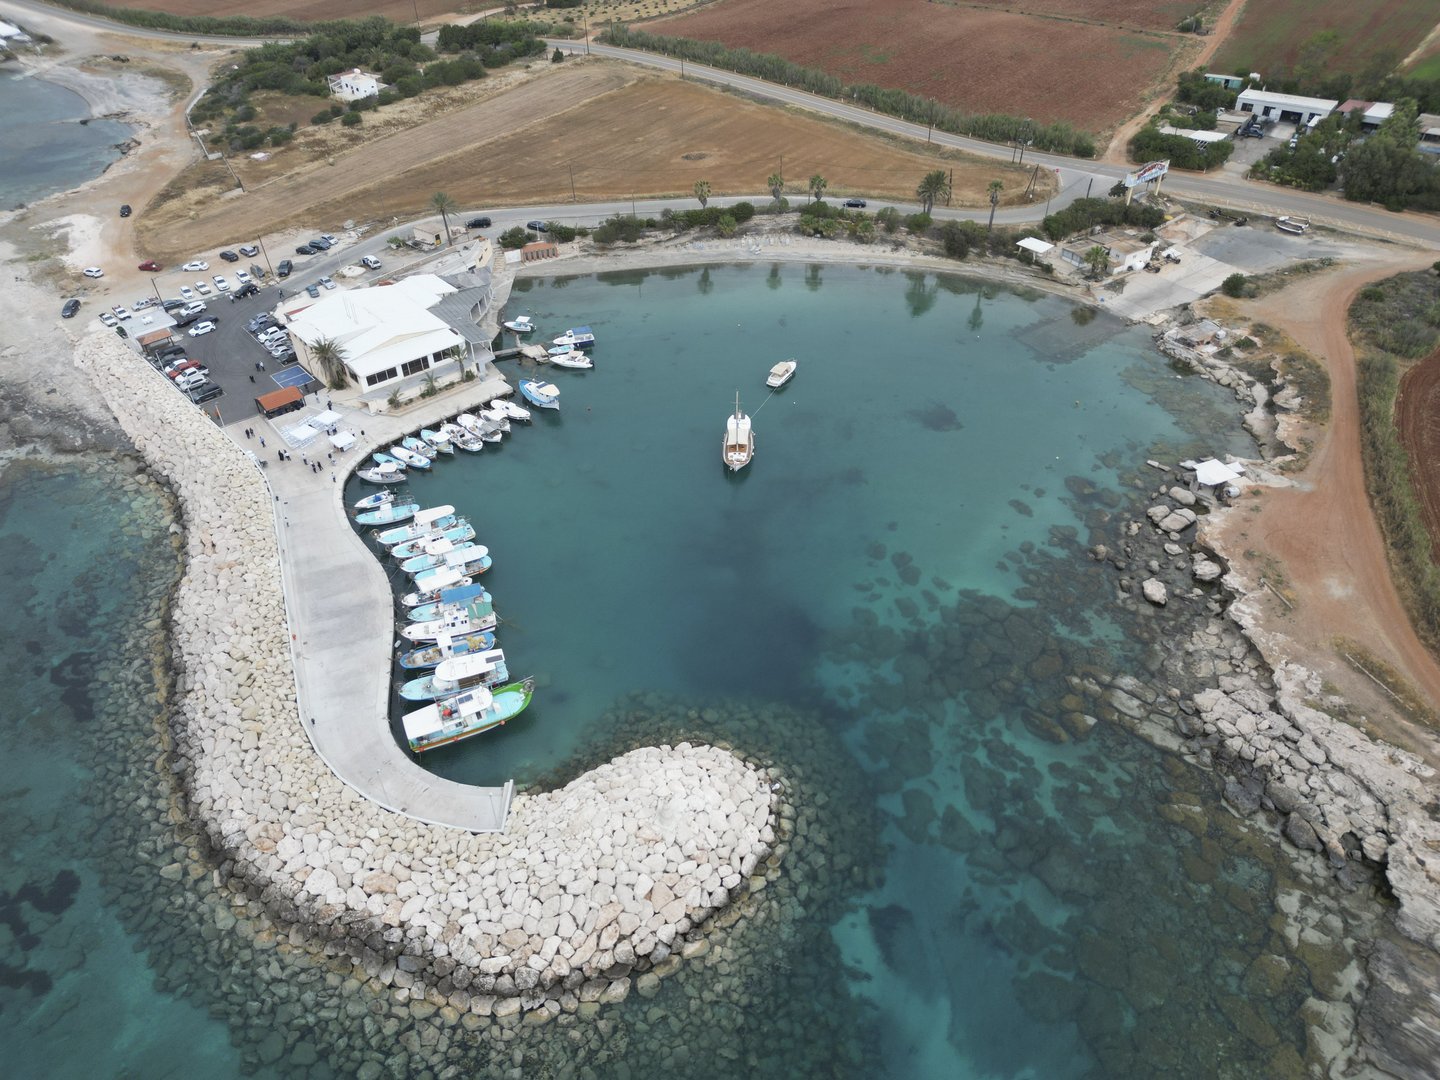 image Ormidia fishing shelter upgraded, government pledges support